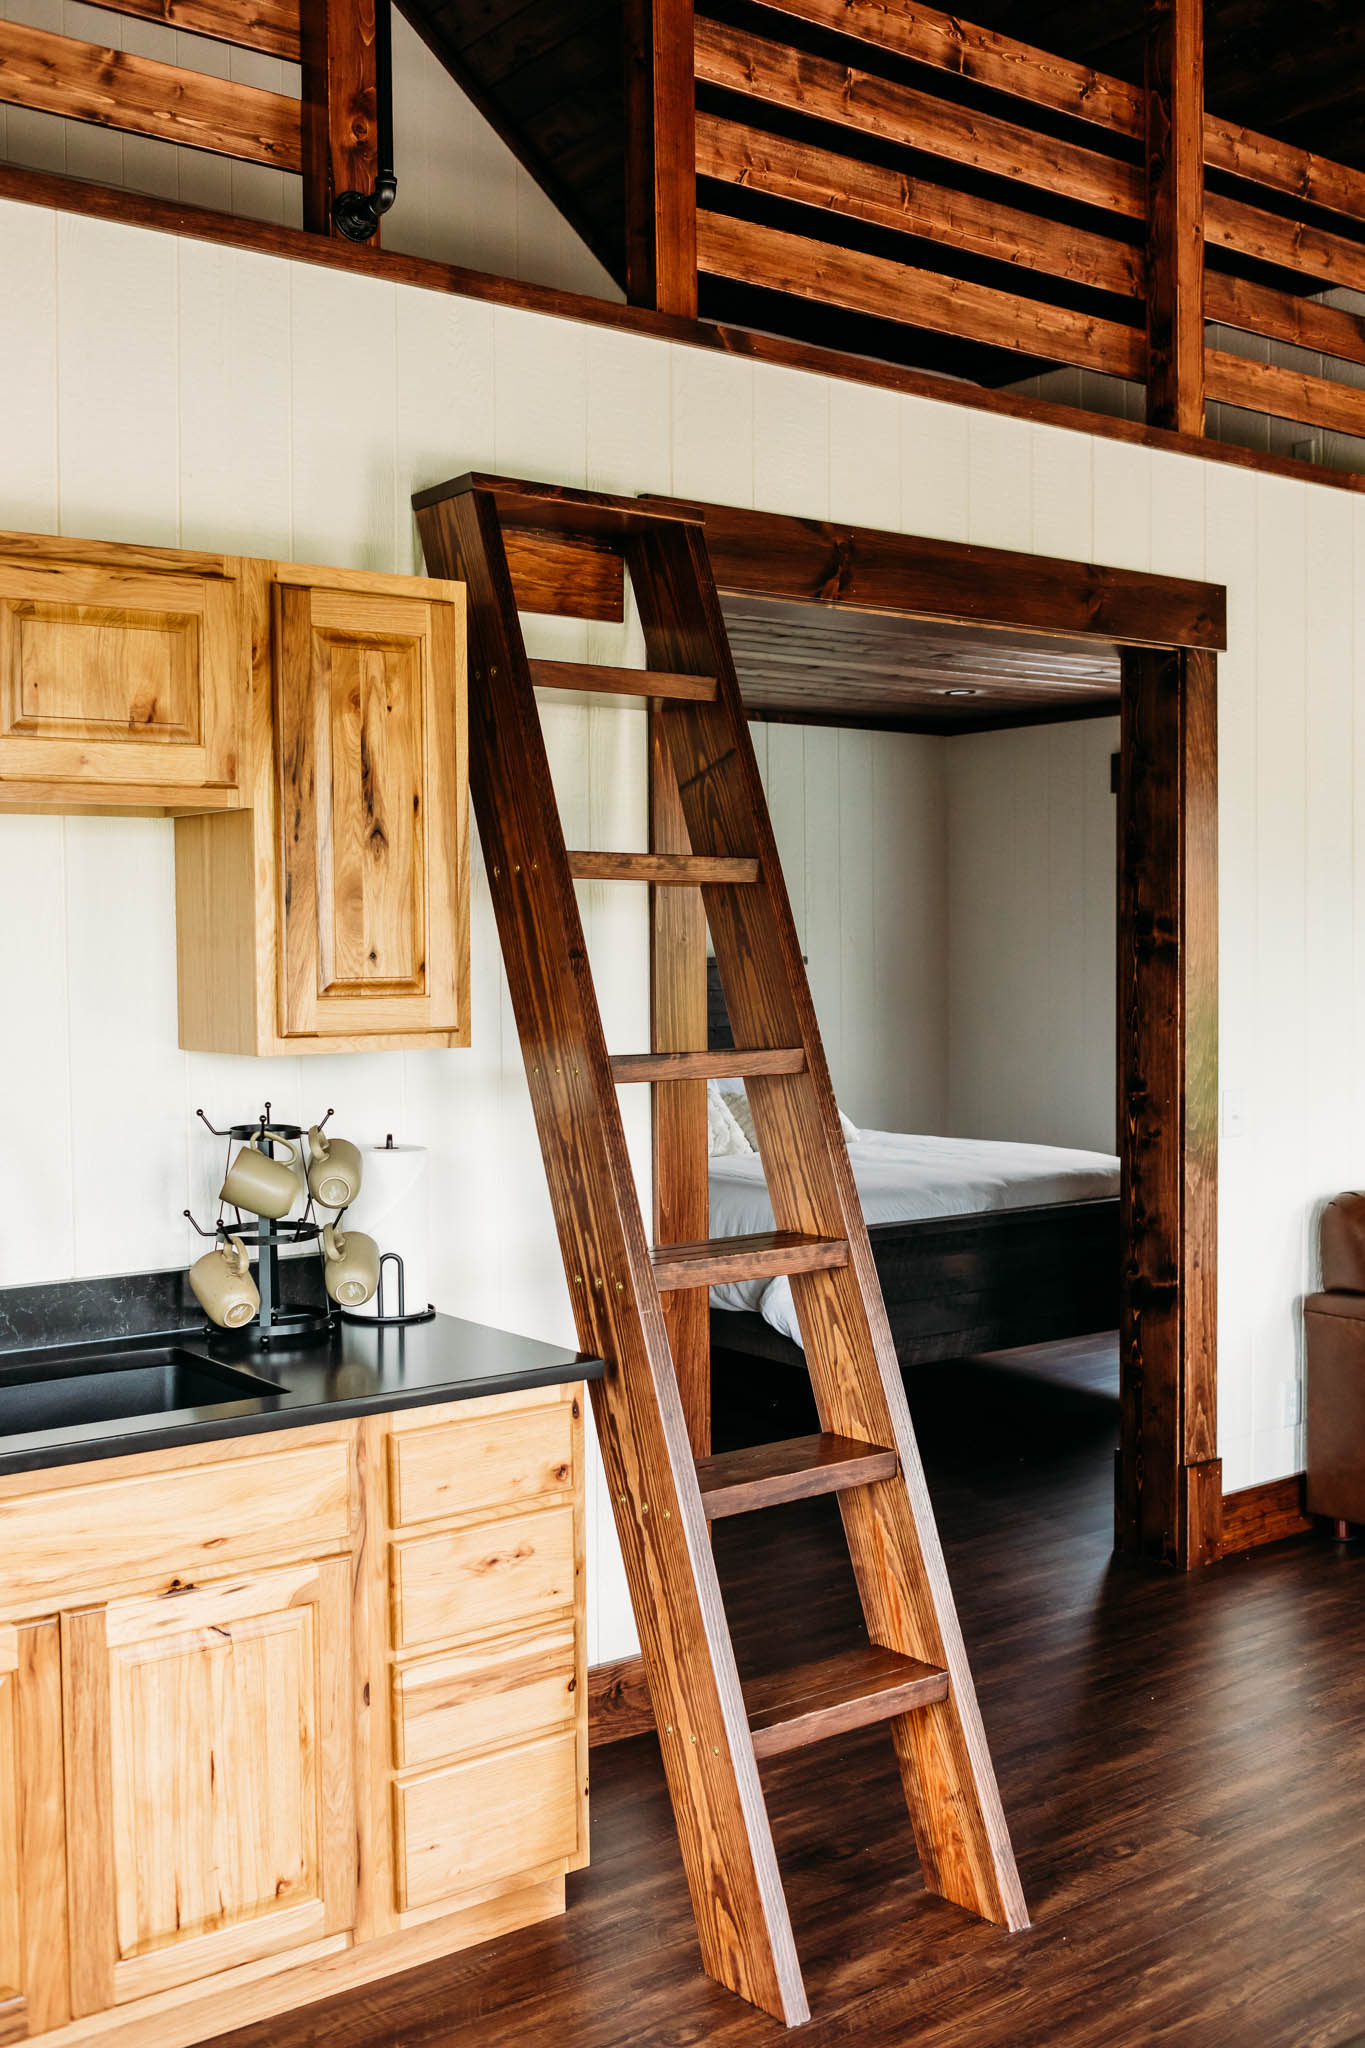 A view of the Villas at The VeNue's ladder leading to the sleeping loft, part of the kitchenette with the bedroom in the background